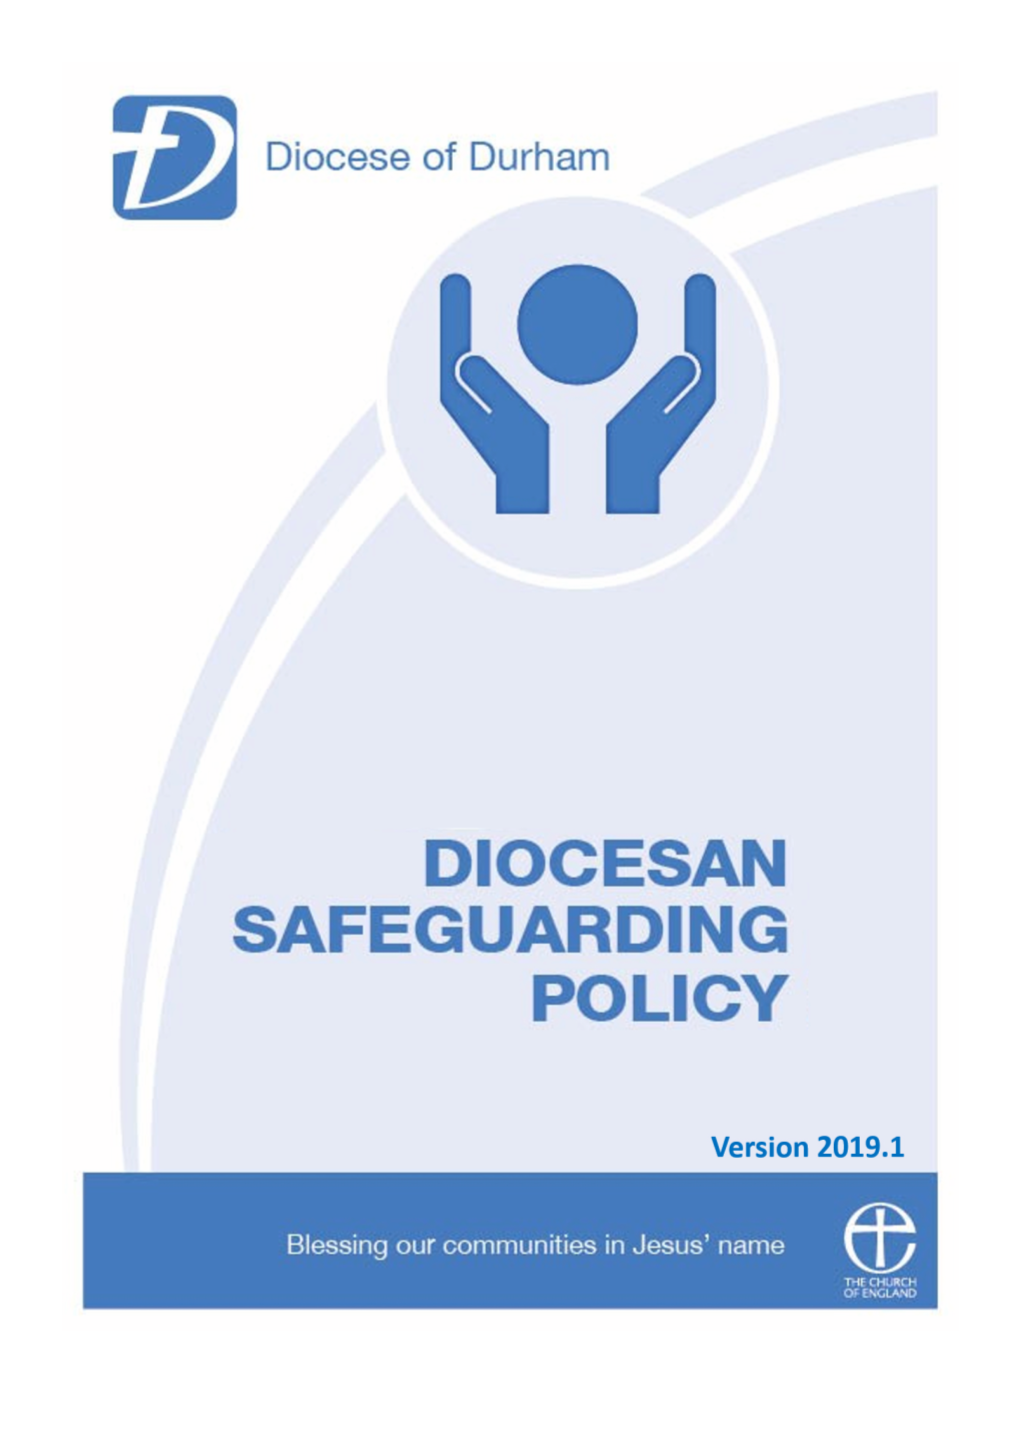 Safeguarding Policy Statement 4 Introduction 6 Aims and Purpose 6 Scope 6 Safeguarding Roles and Responsibilities 6